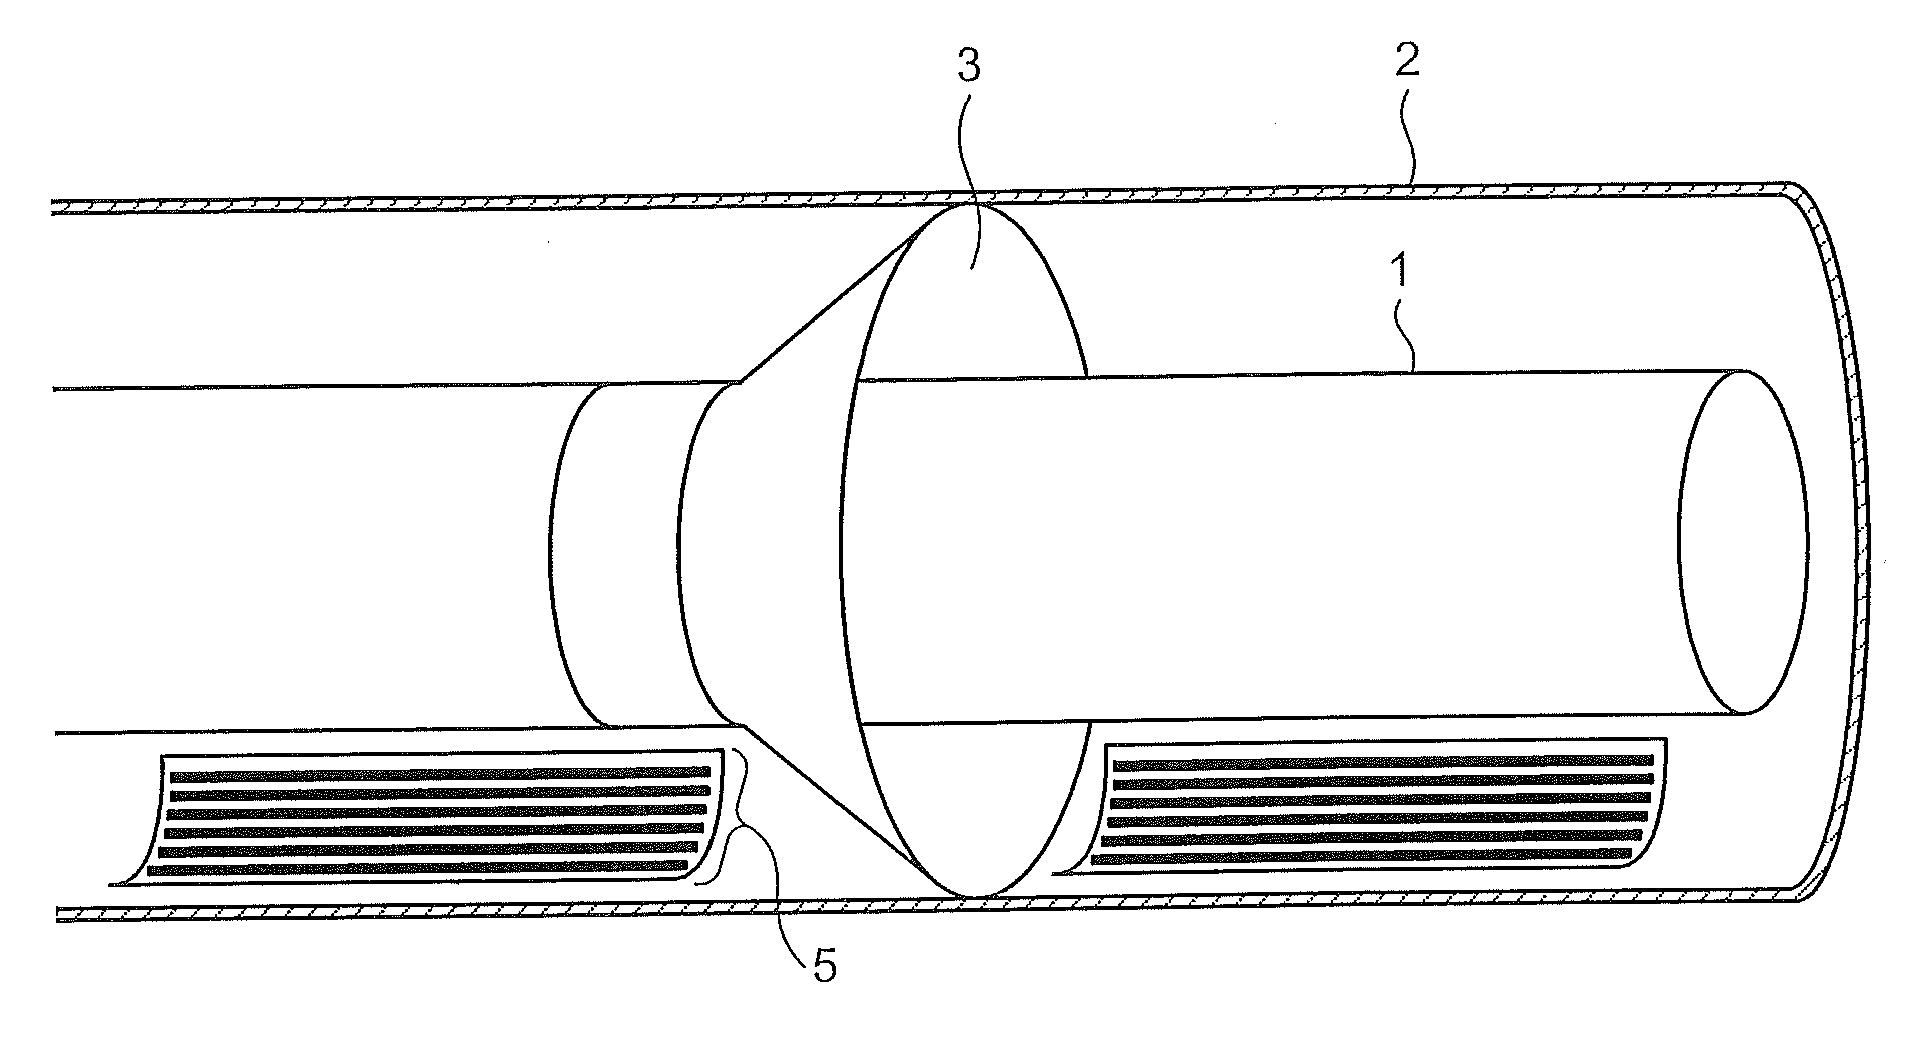 Fluid-insulated electrical apparatus